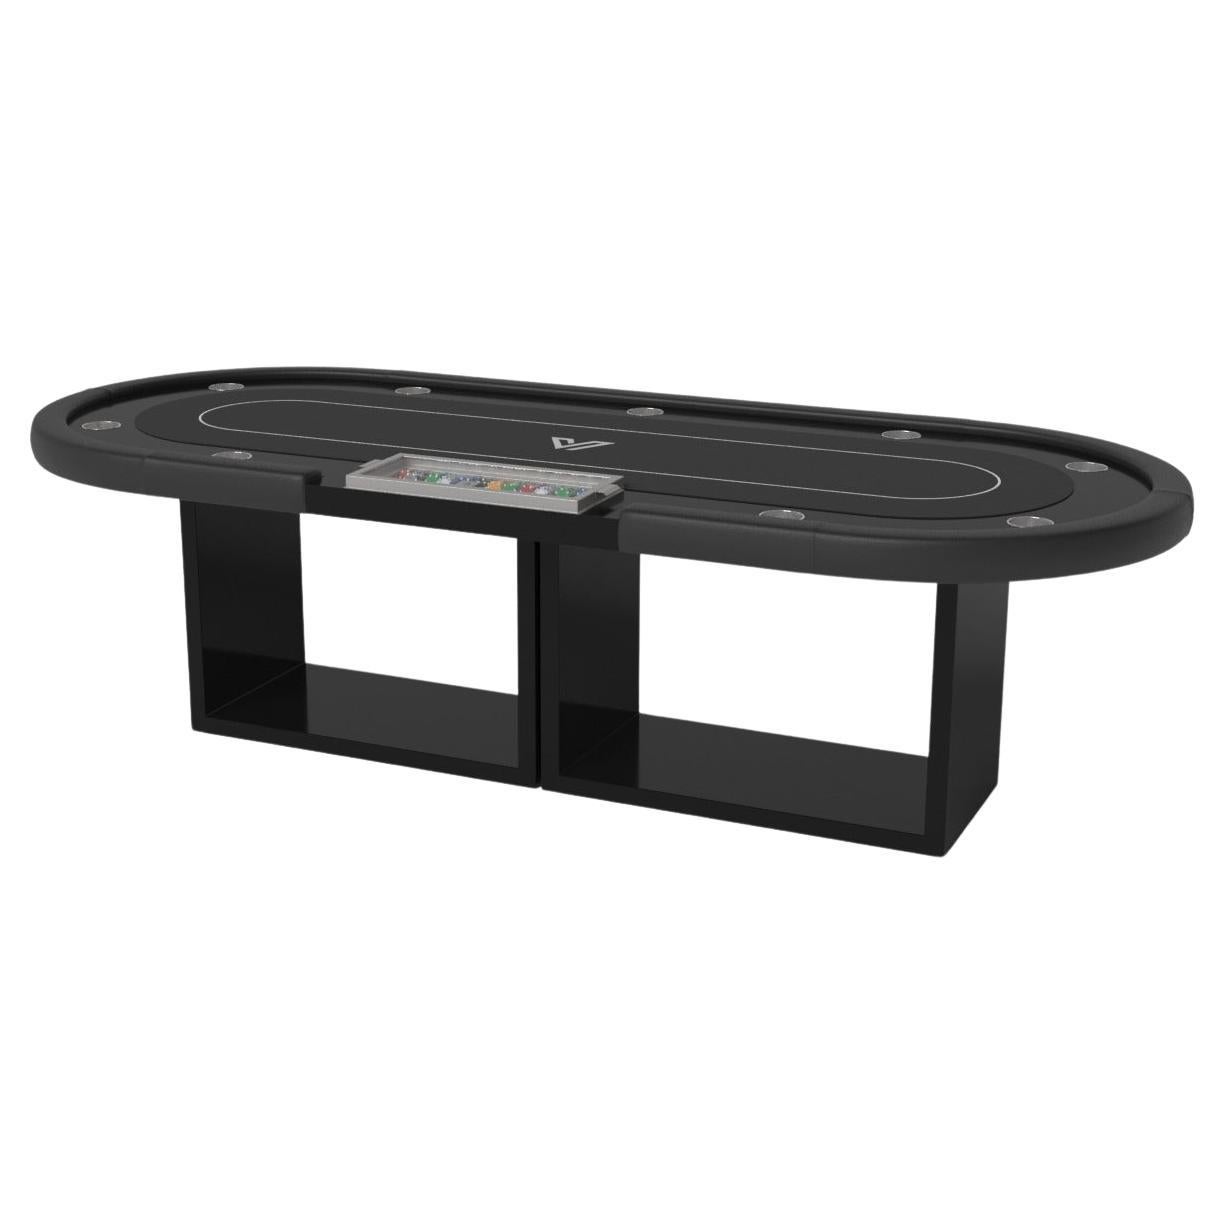 Elevate Customs Ambrosia Poker Tables / Solid Pantone Black Color in 8'8" - USA For Sale